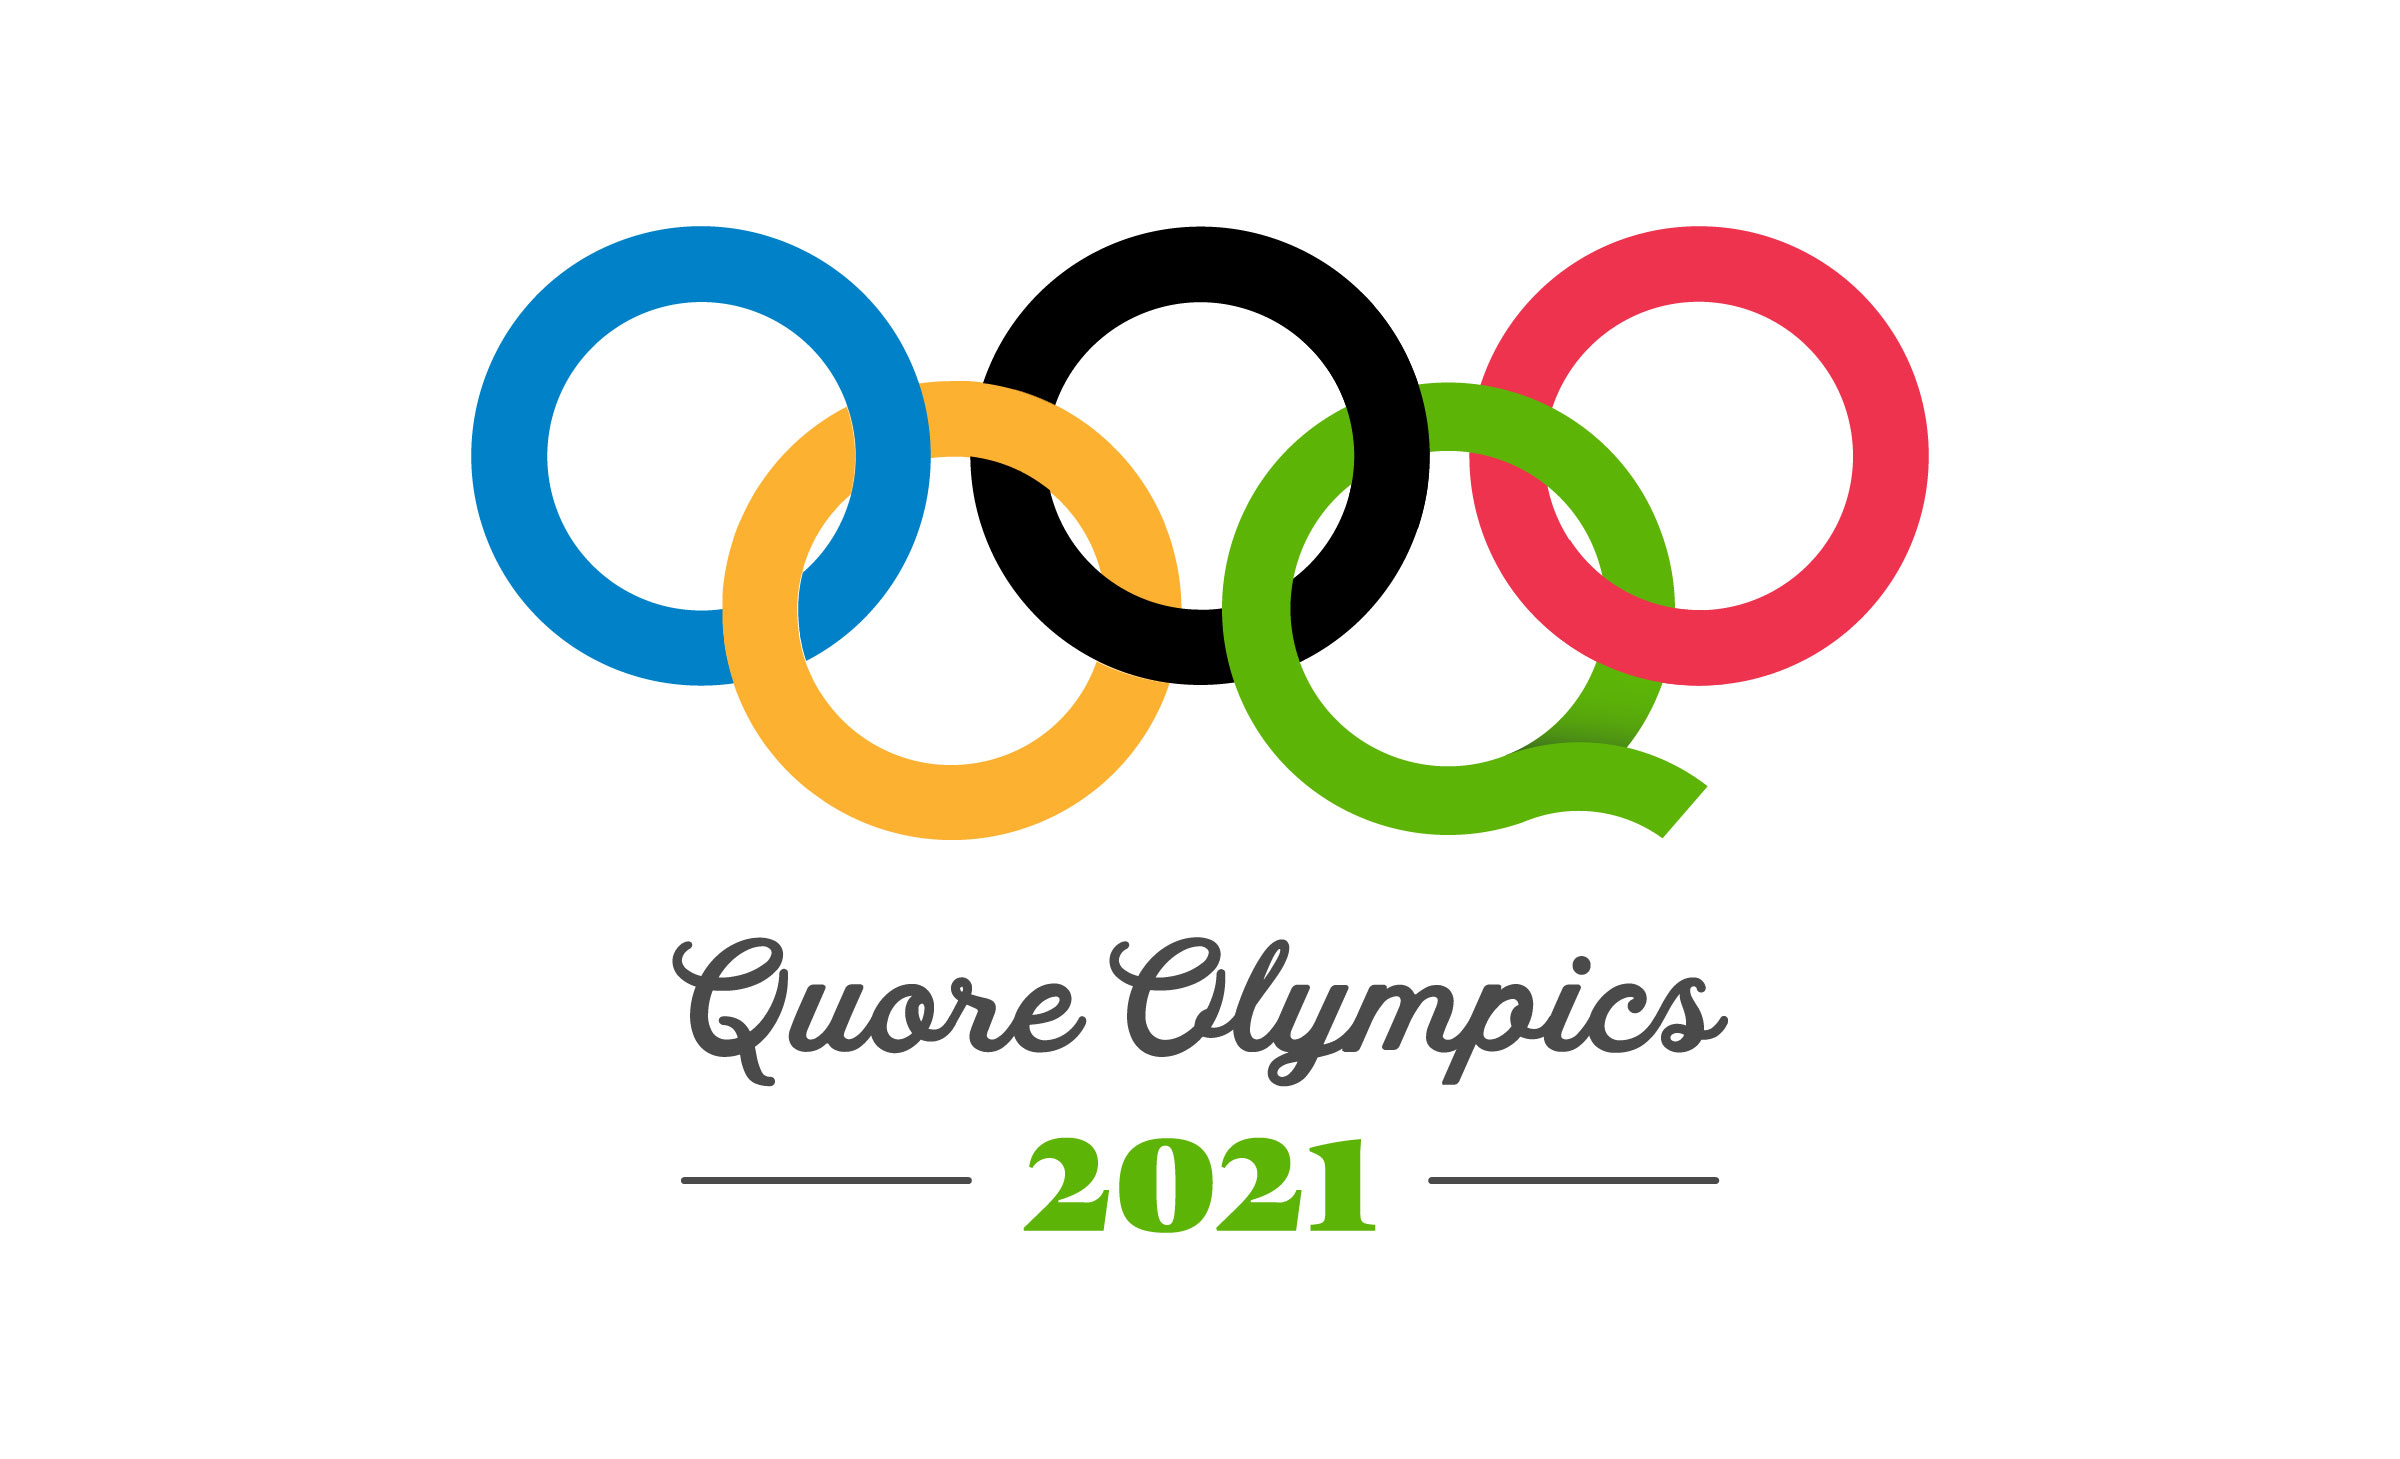 Celebrating the Olympics at Quore